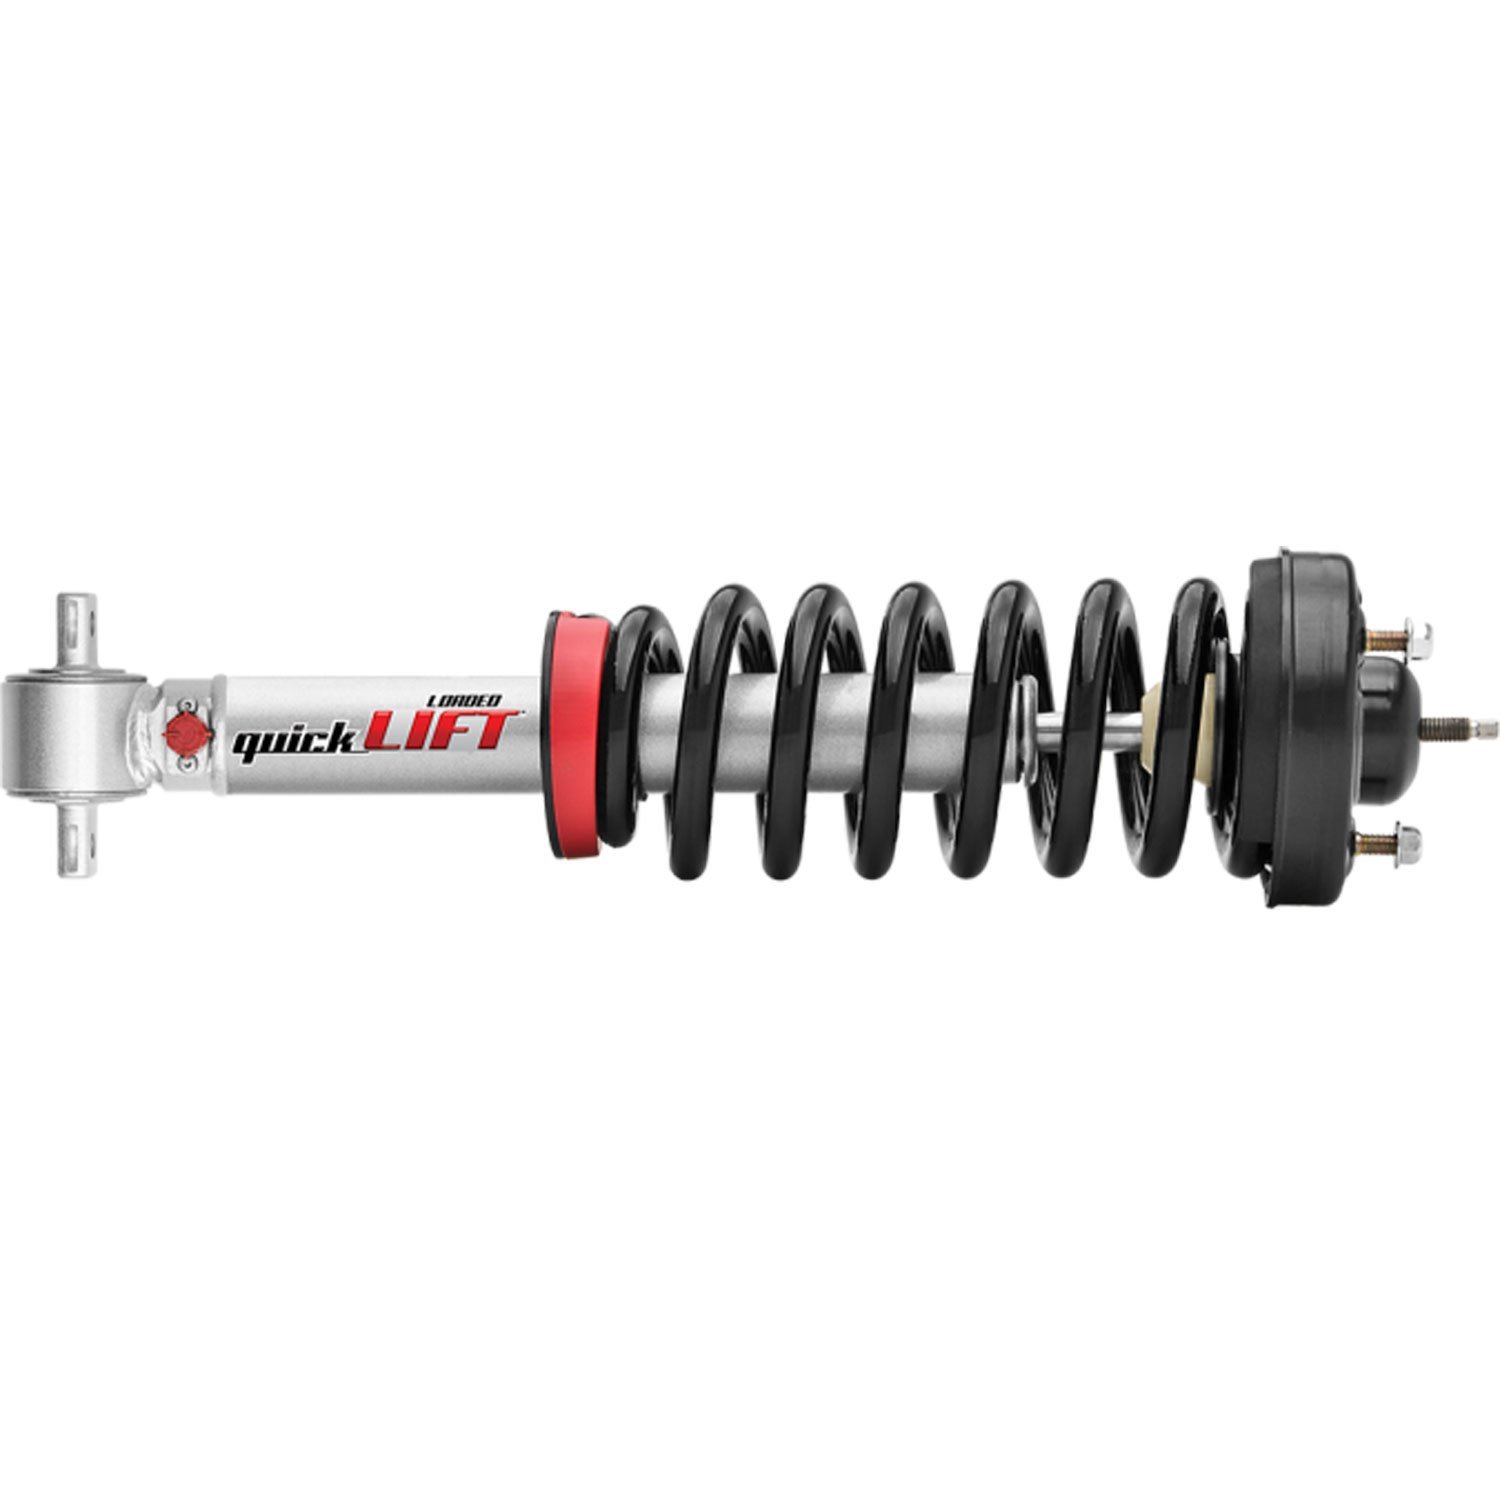 QuickLift Complete Strut Assembly Fits GM 1/2-ton Pickups